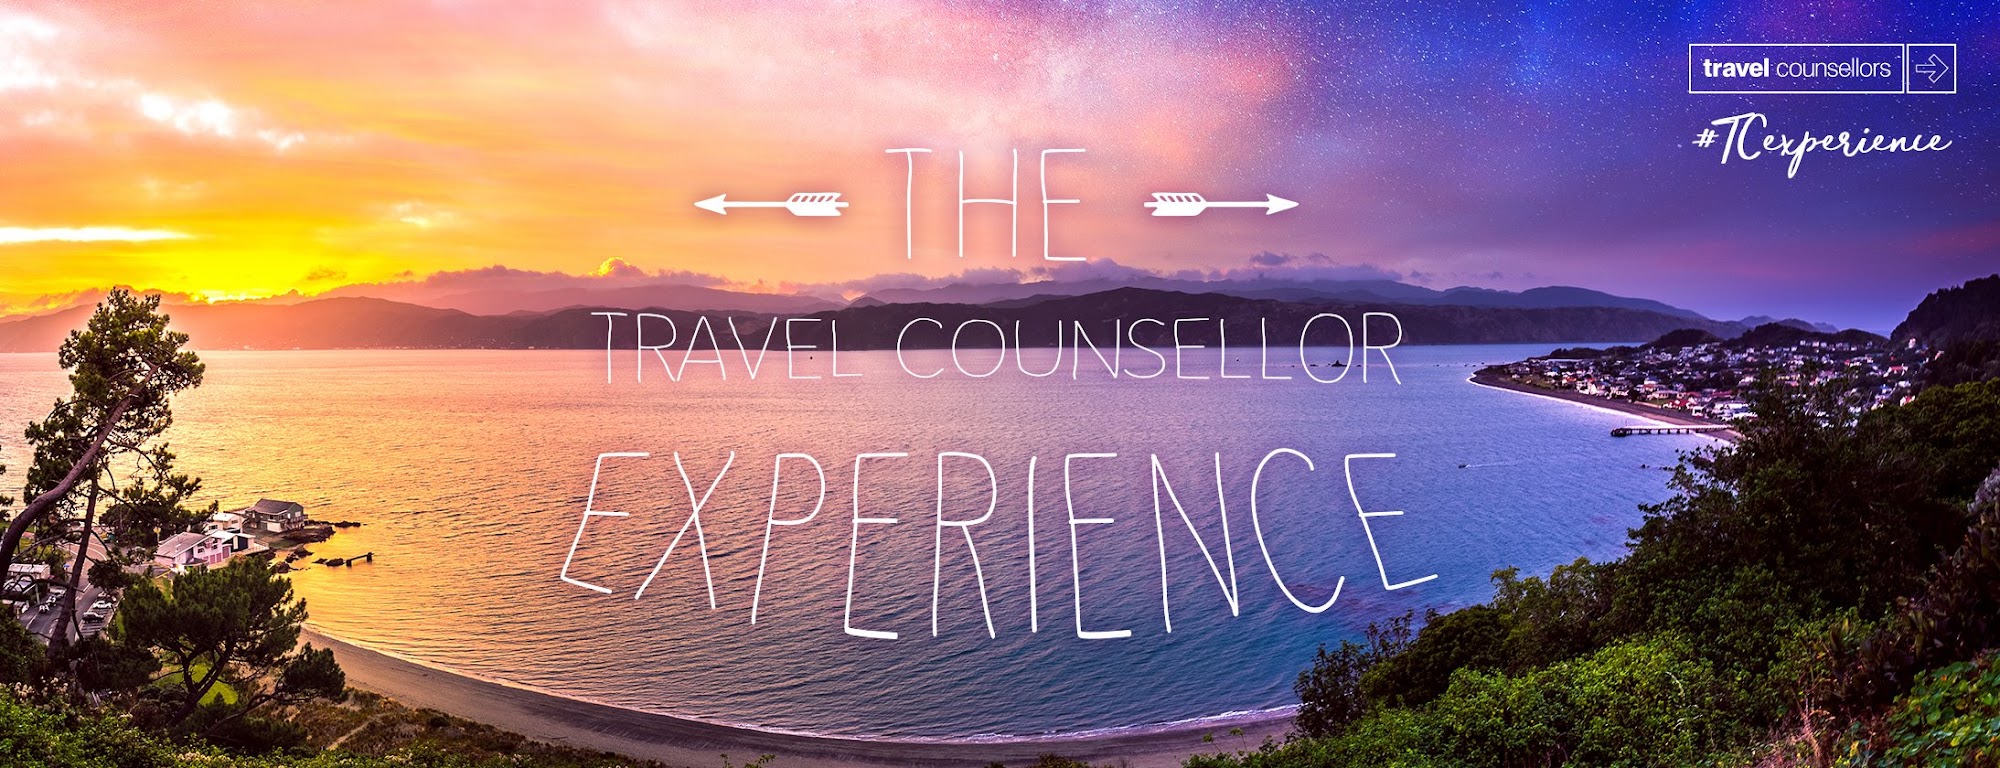 Travel Counsellor Suzanne Nagtegaal